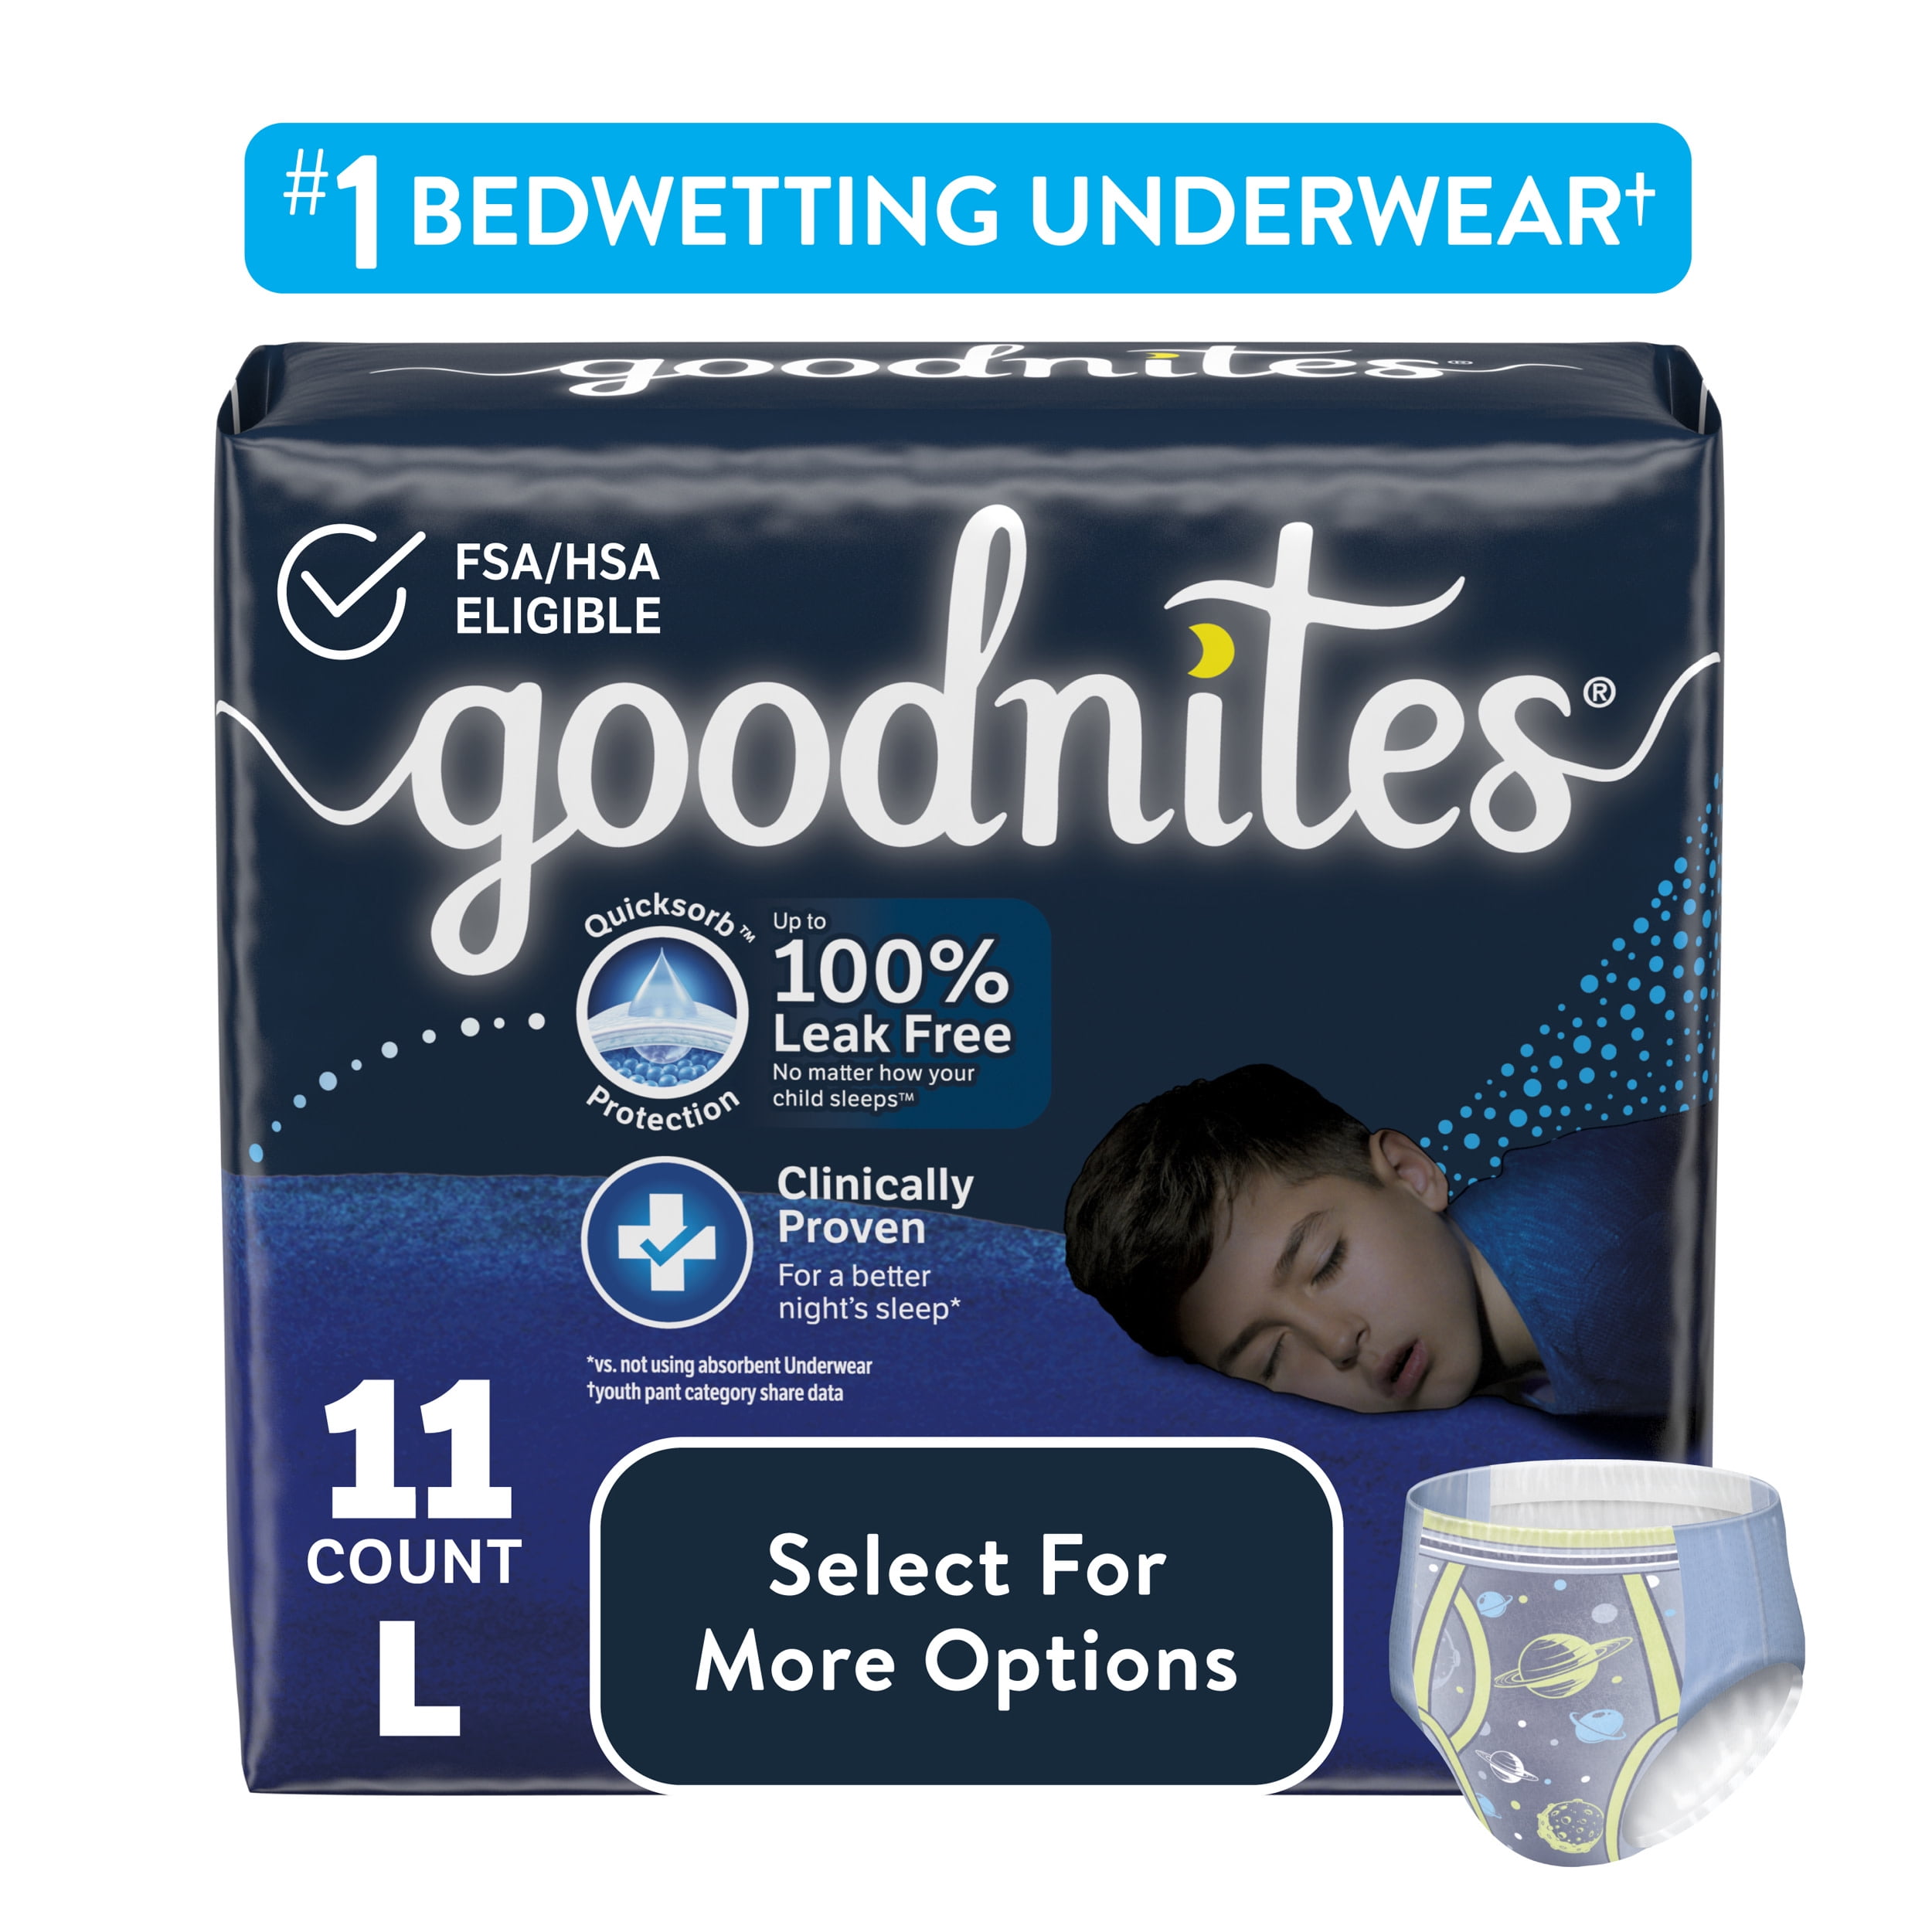 Dropship Goodnites Boys' Nighttime Bedwetting Underwear Size S/M, 44 Count  to Sell Online at a Lower Price